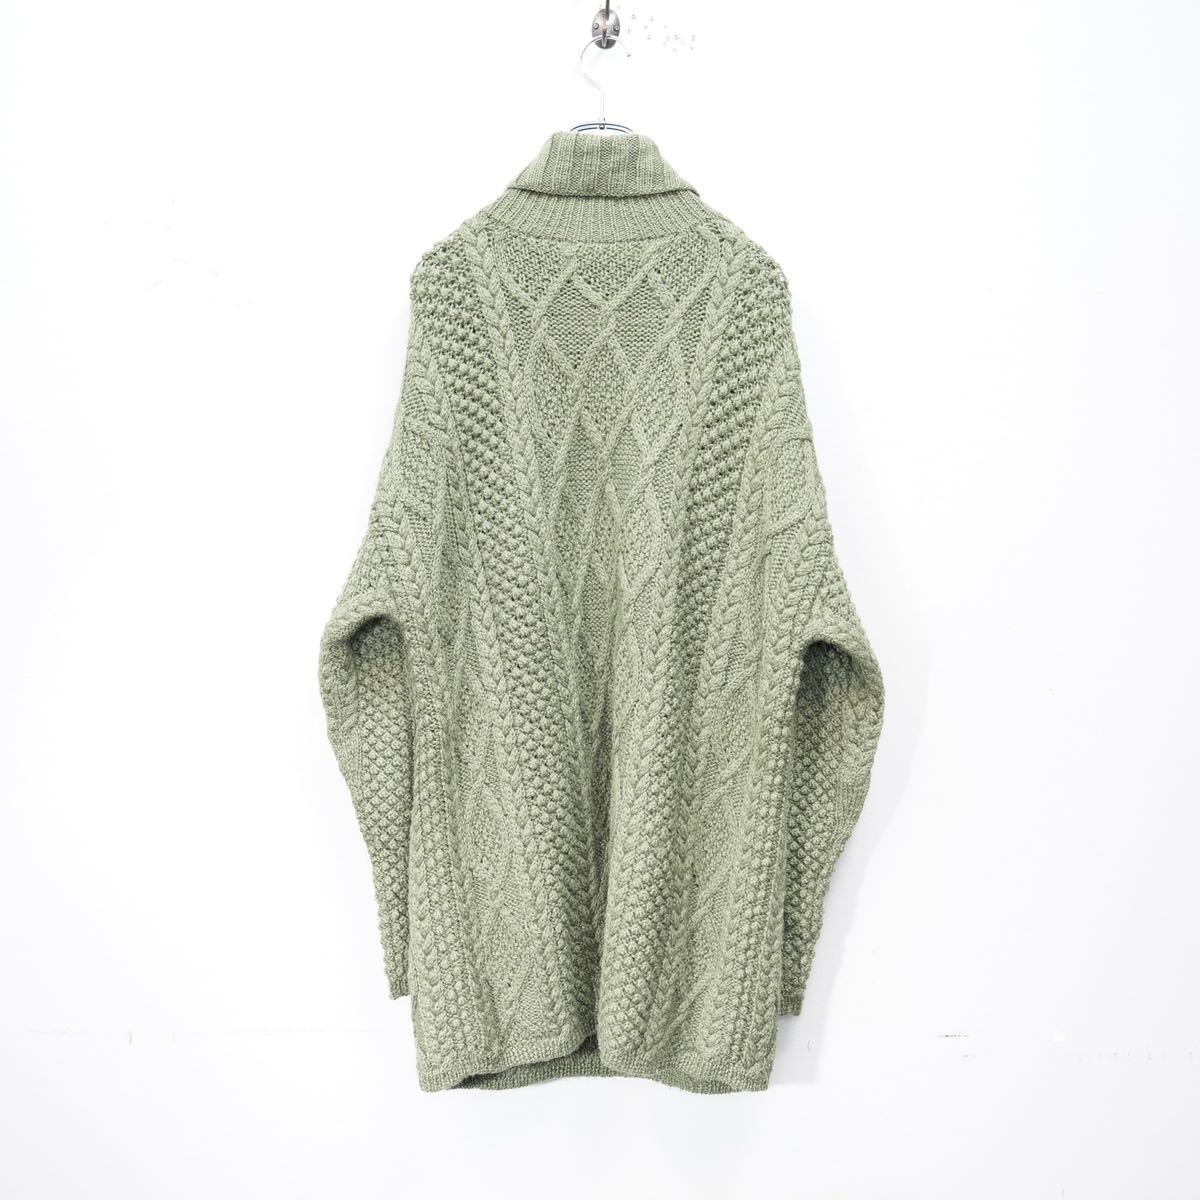 USA VINATGE J.CREW CABLE DESIGN HIGH NECK KNIT ONE PIECE/アメリカ古着ケーブルデザインハイネックニットワンピース_画像5